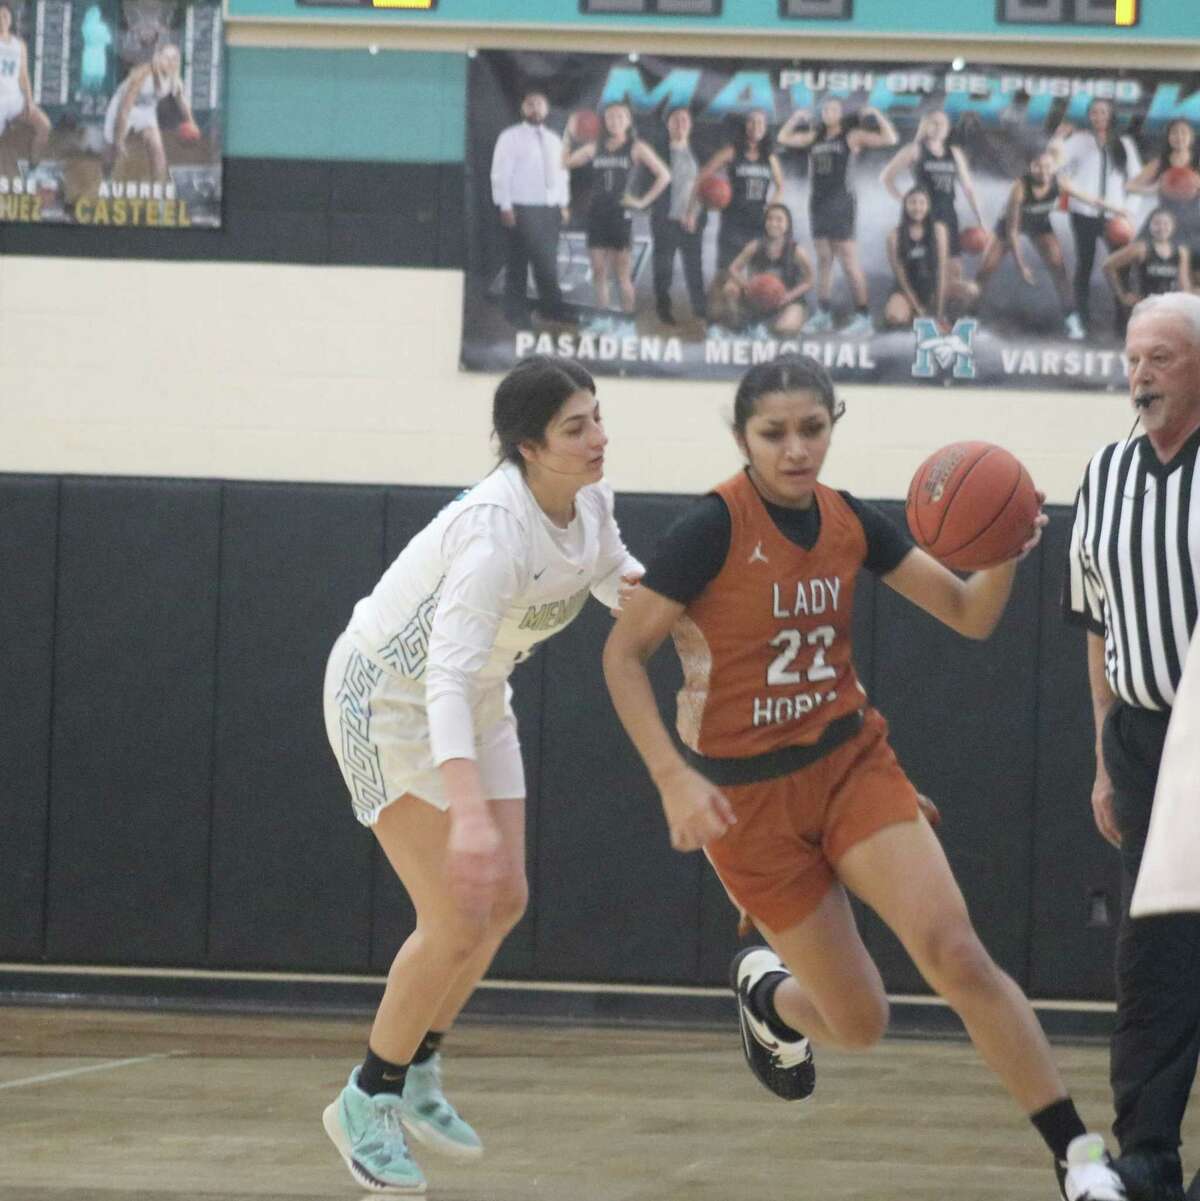 Victoria Rivera hustles the ball up court during first-half action. But she stepped out of bounds en route to doing so on this possession.